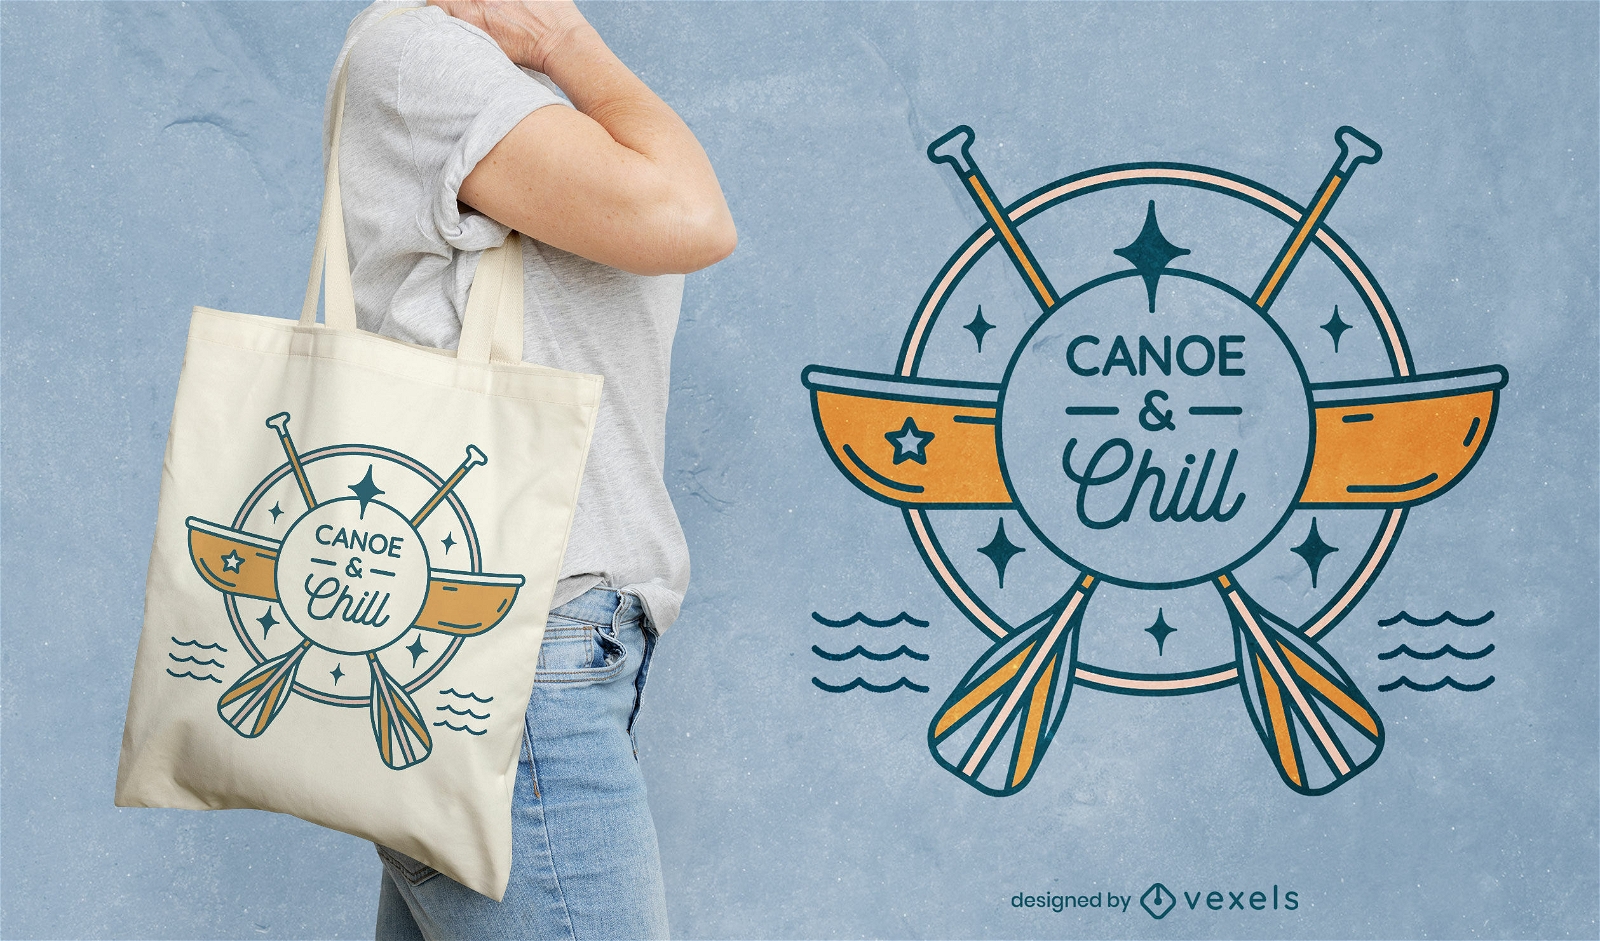 Canoe and chill tote bag design